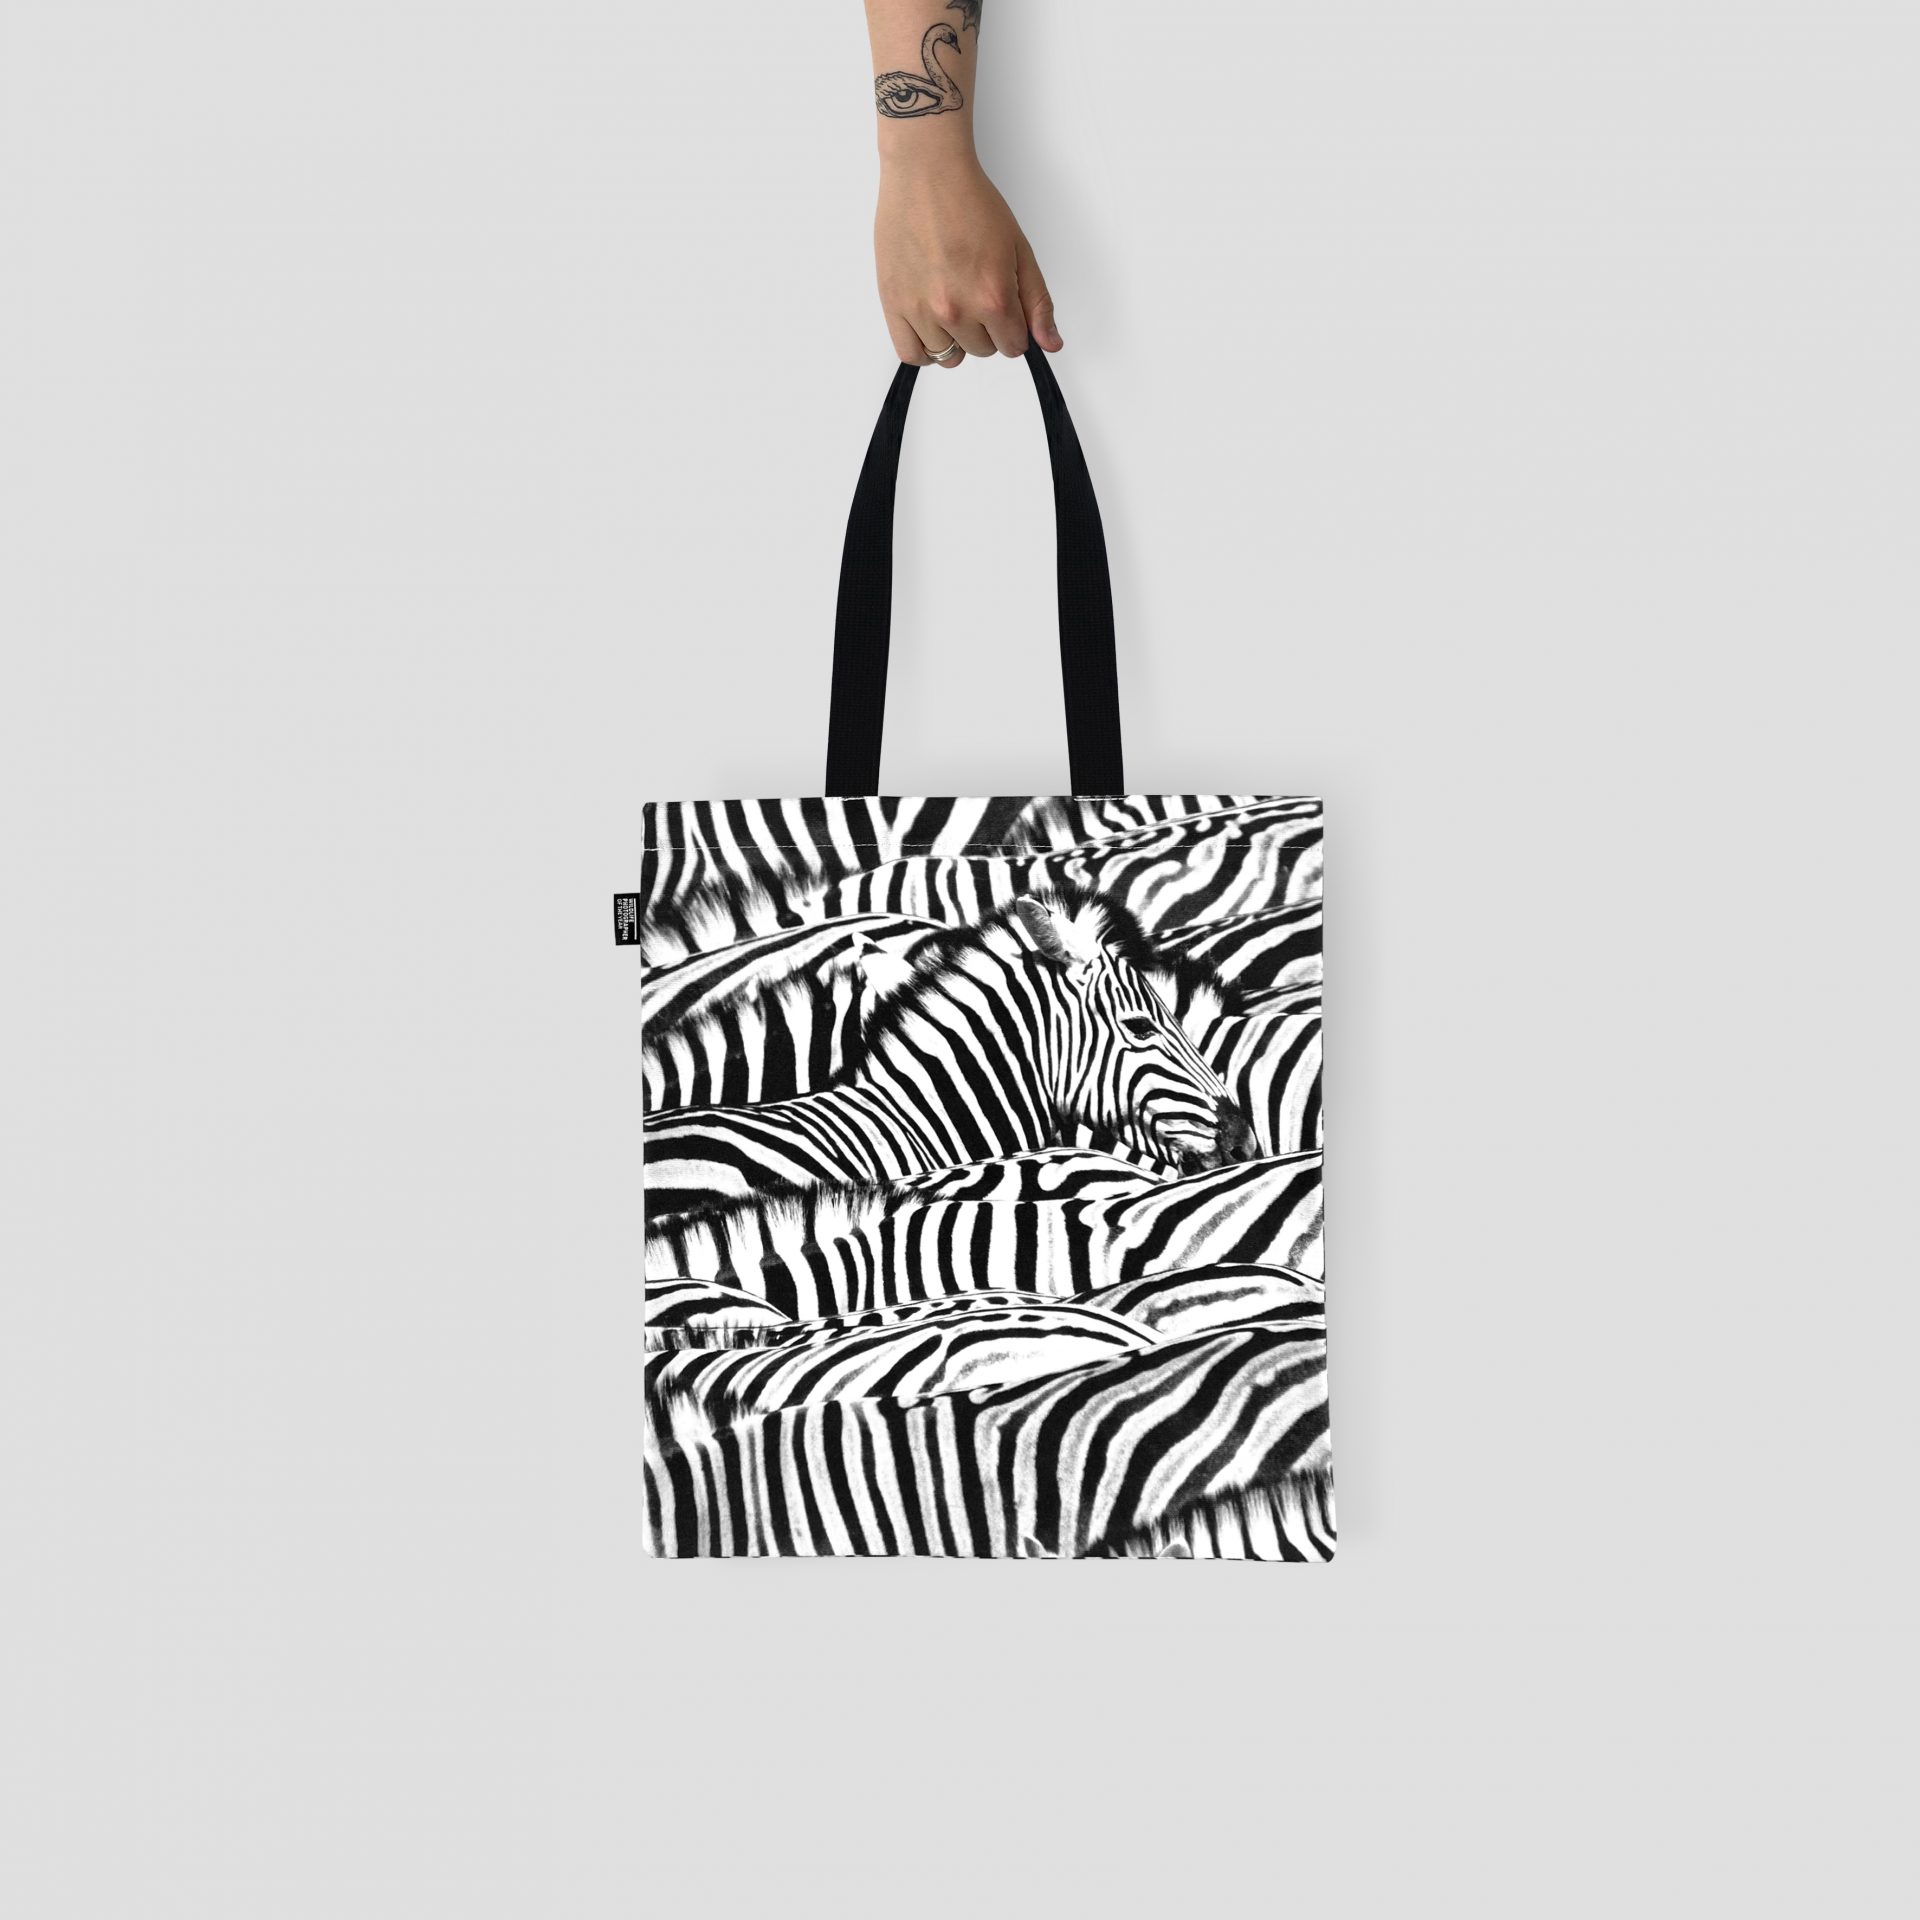 Natural History Musuem produced this beautiful digital print onto a tote bag with Paul Bristow's